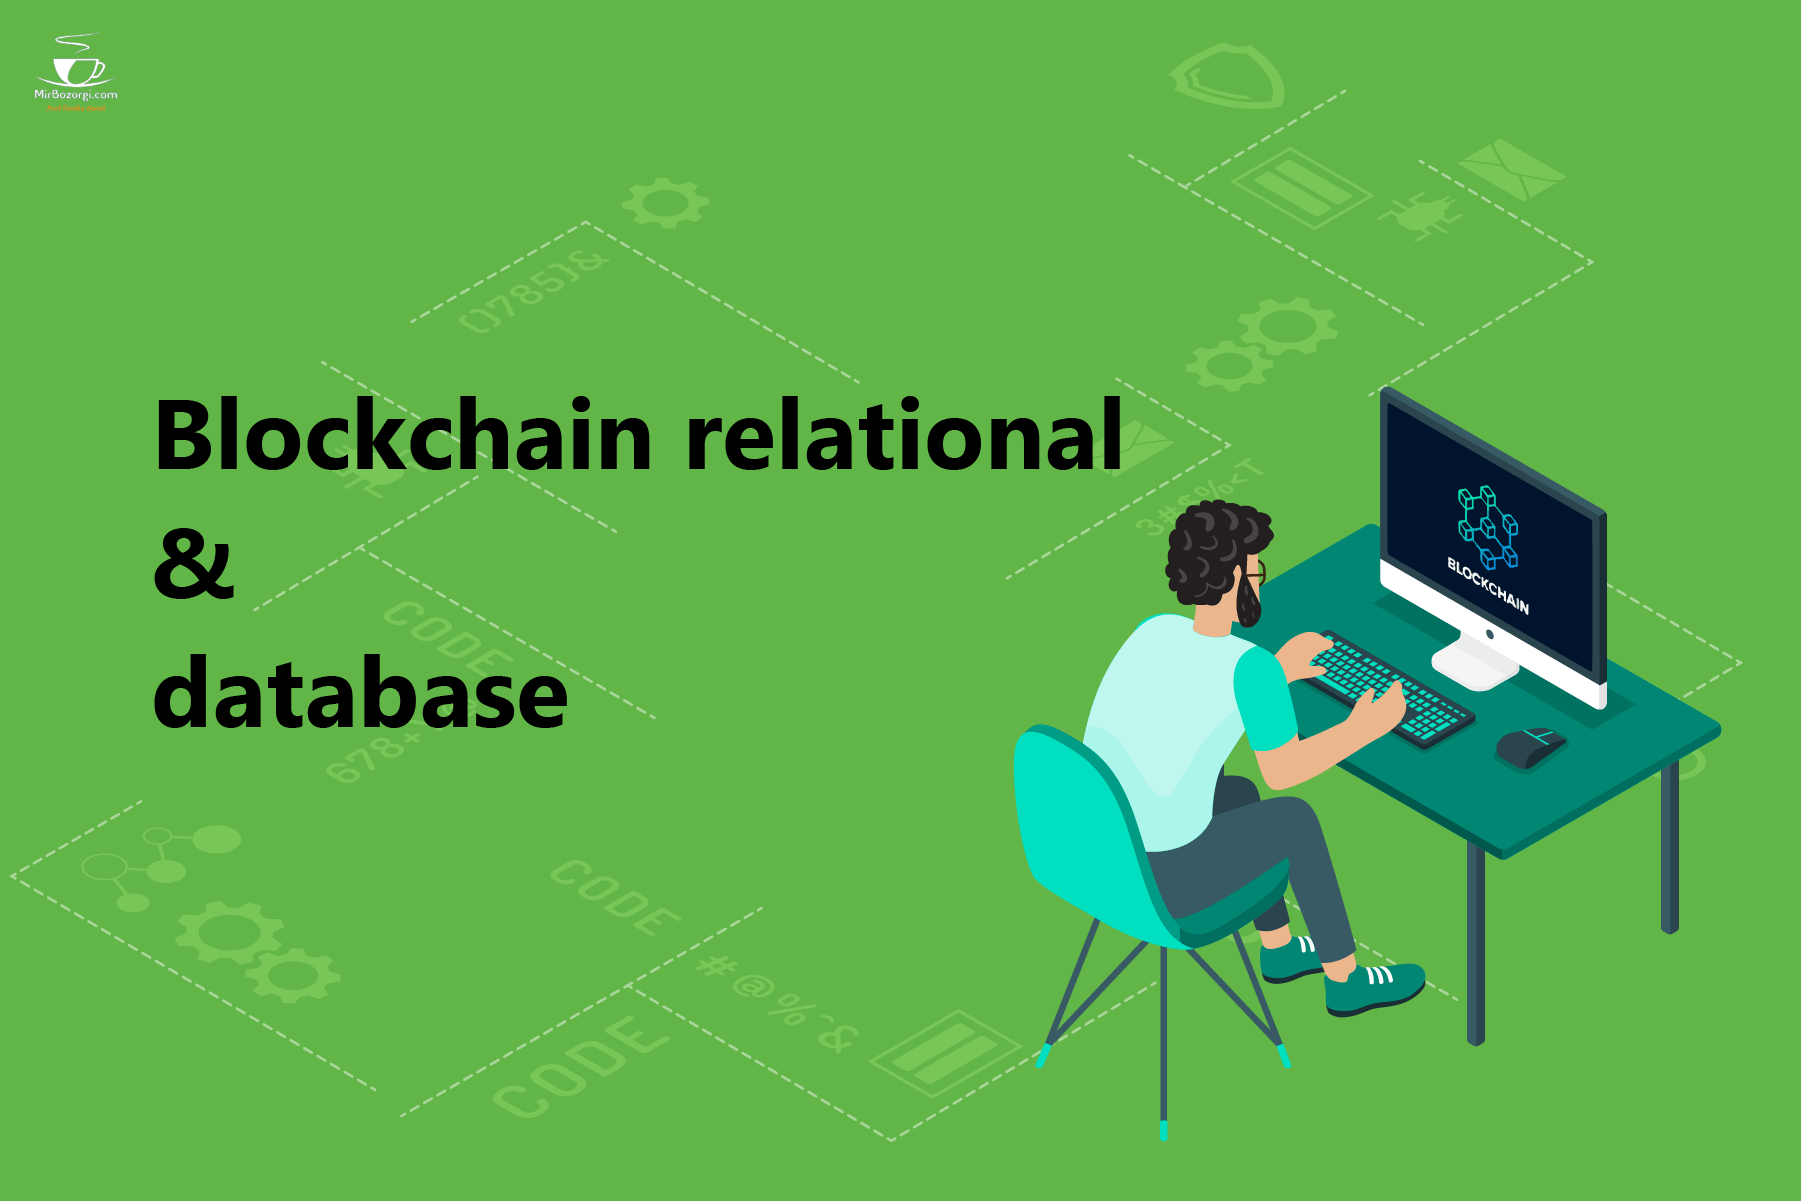 Compare Blockchain and Relational Database